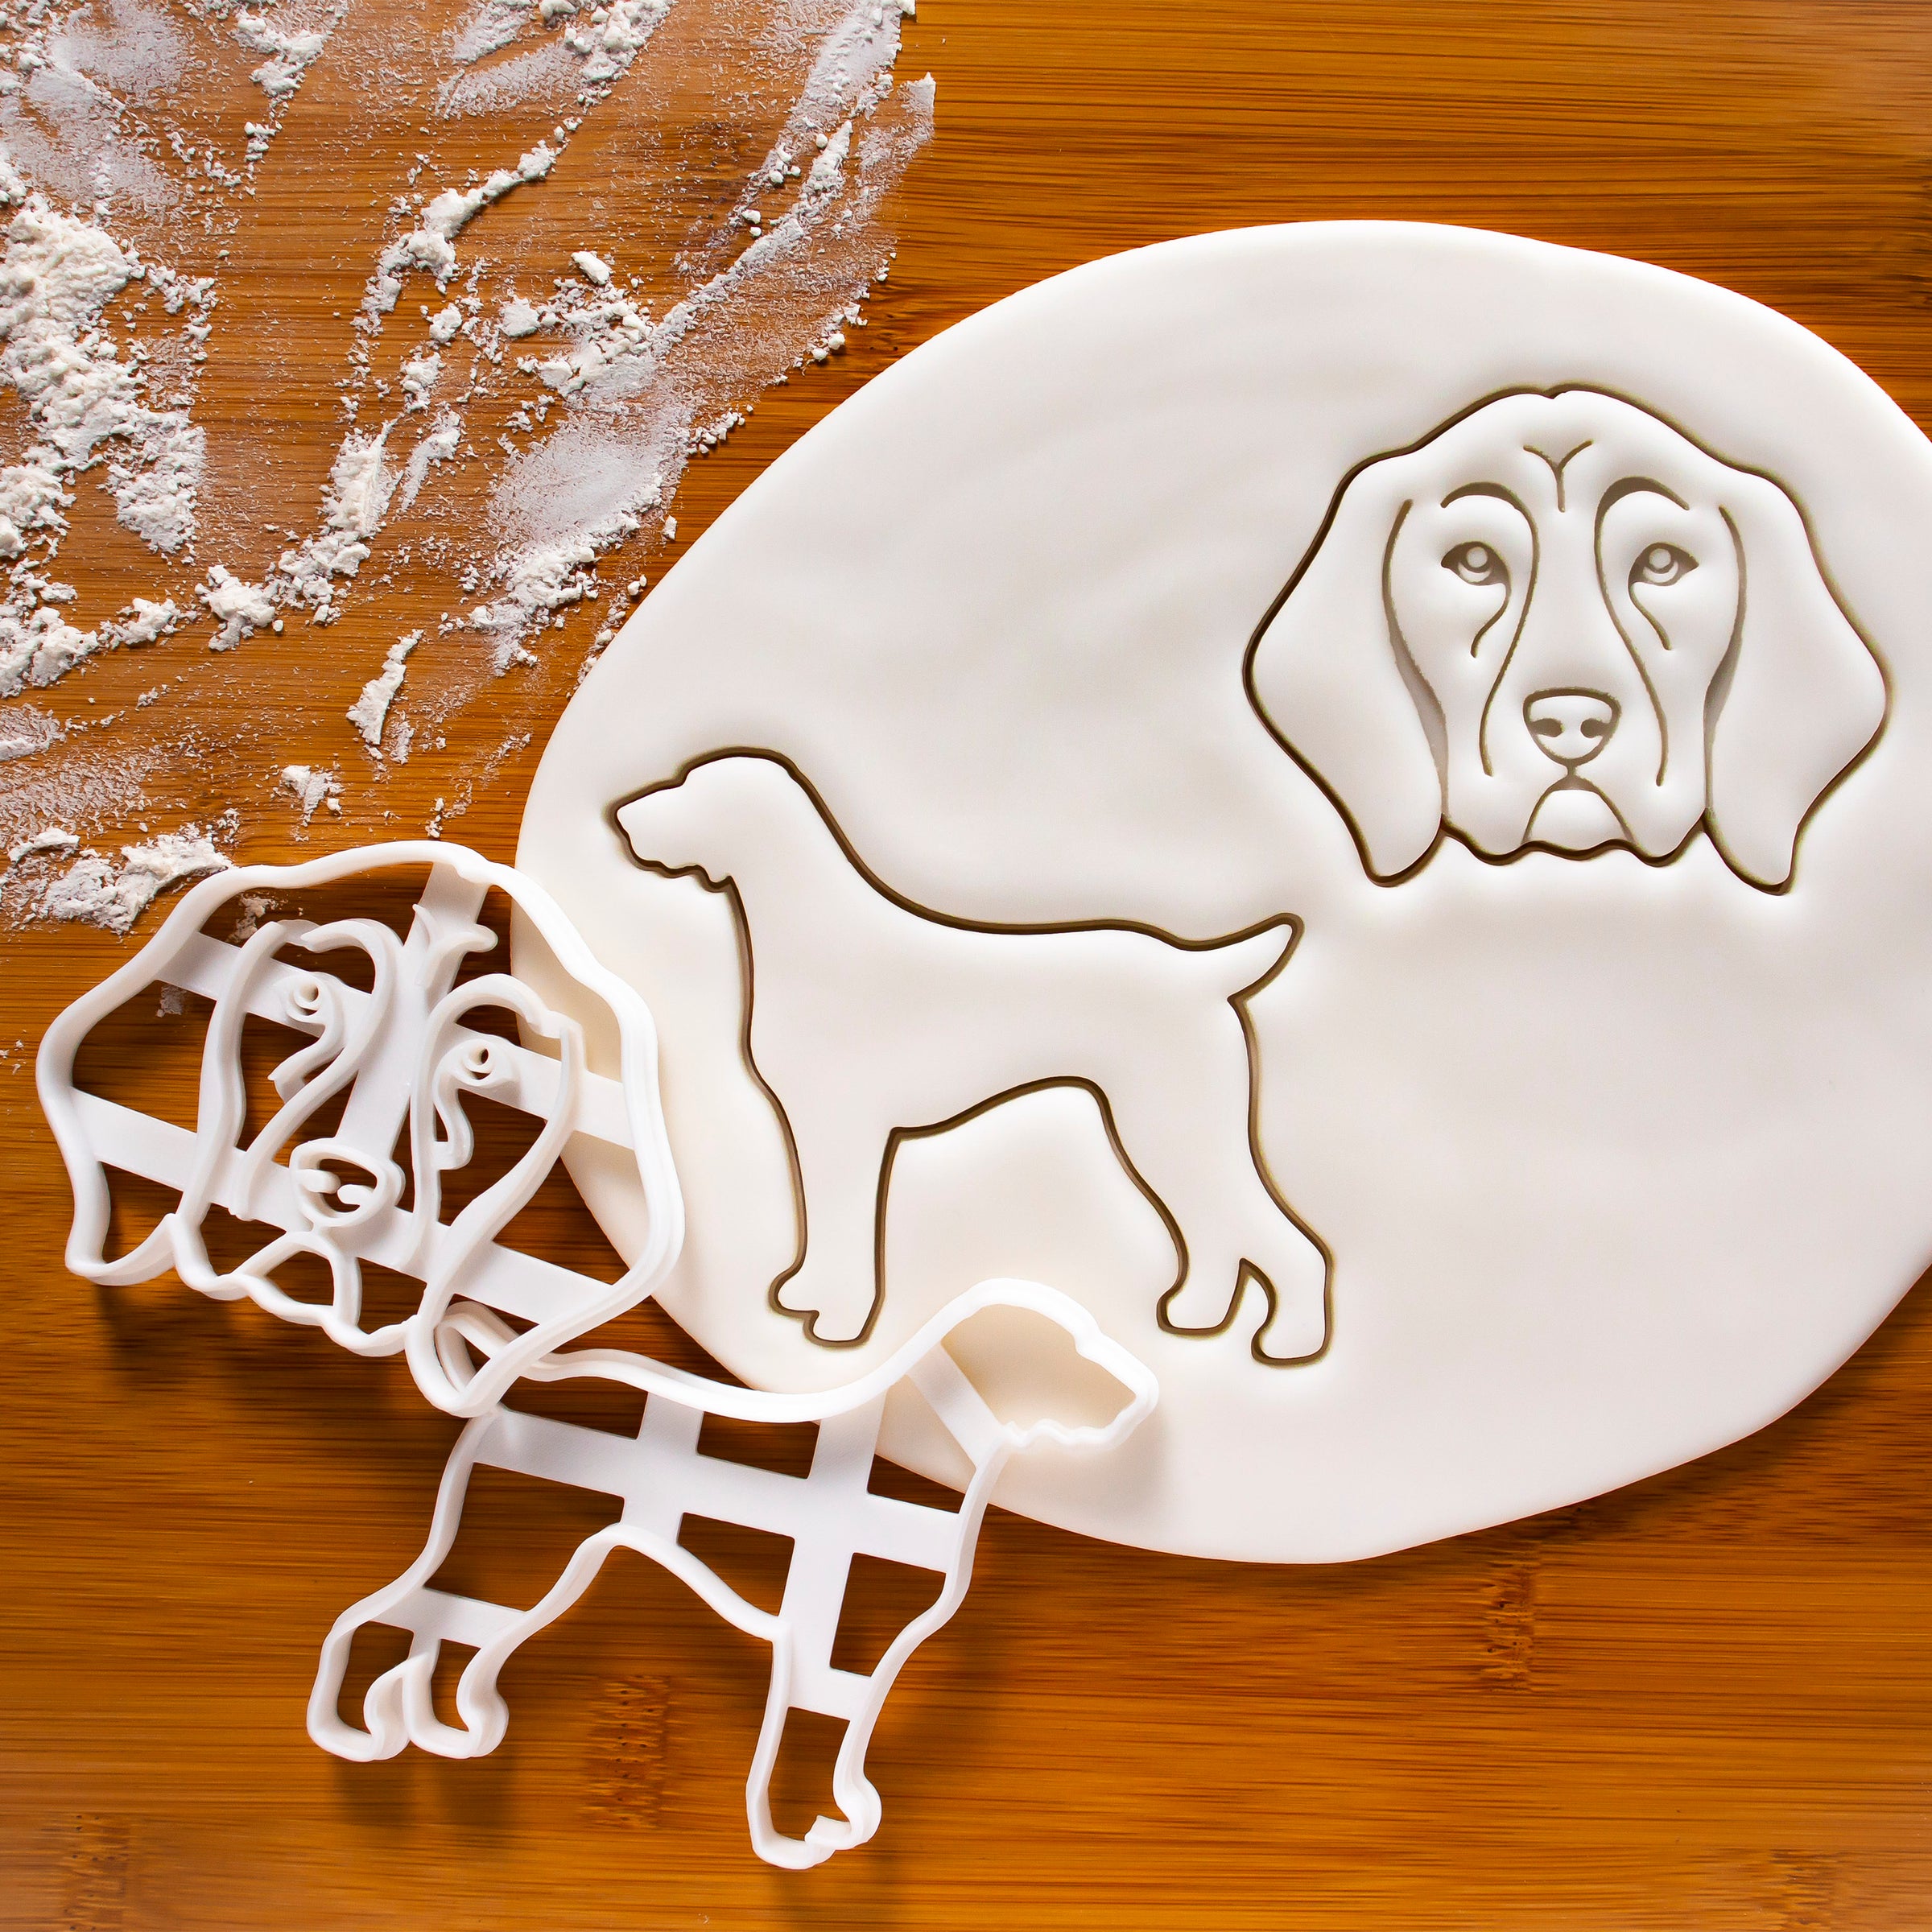 Set of 2 German Shorthaired Pointer (GSP) cookie cutters